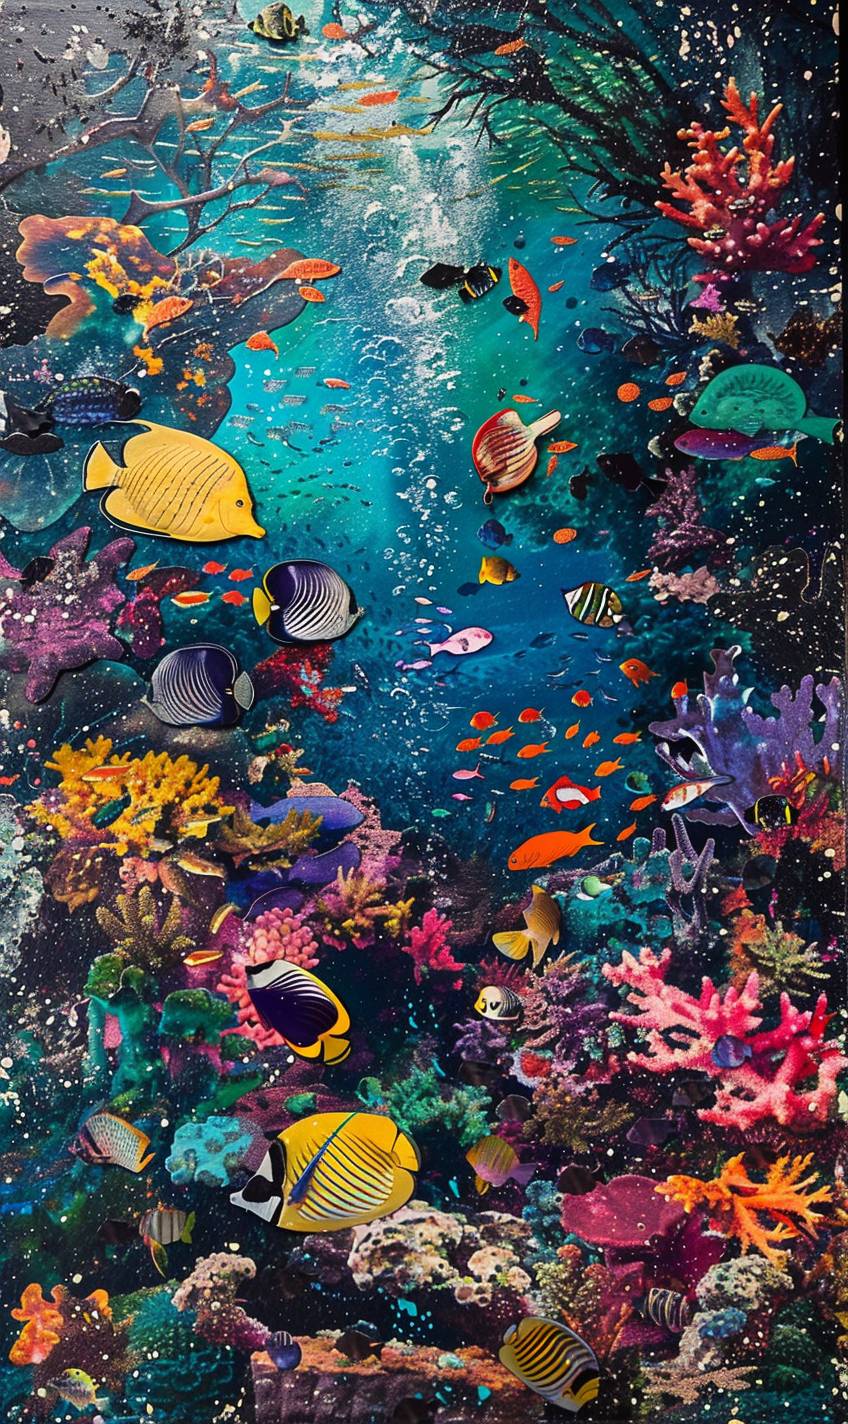 A vibrant underwater coral reef, teeming with colorful fish and marine life by Herman Brood